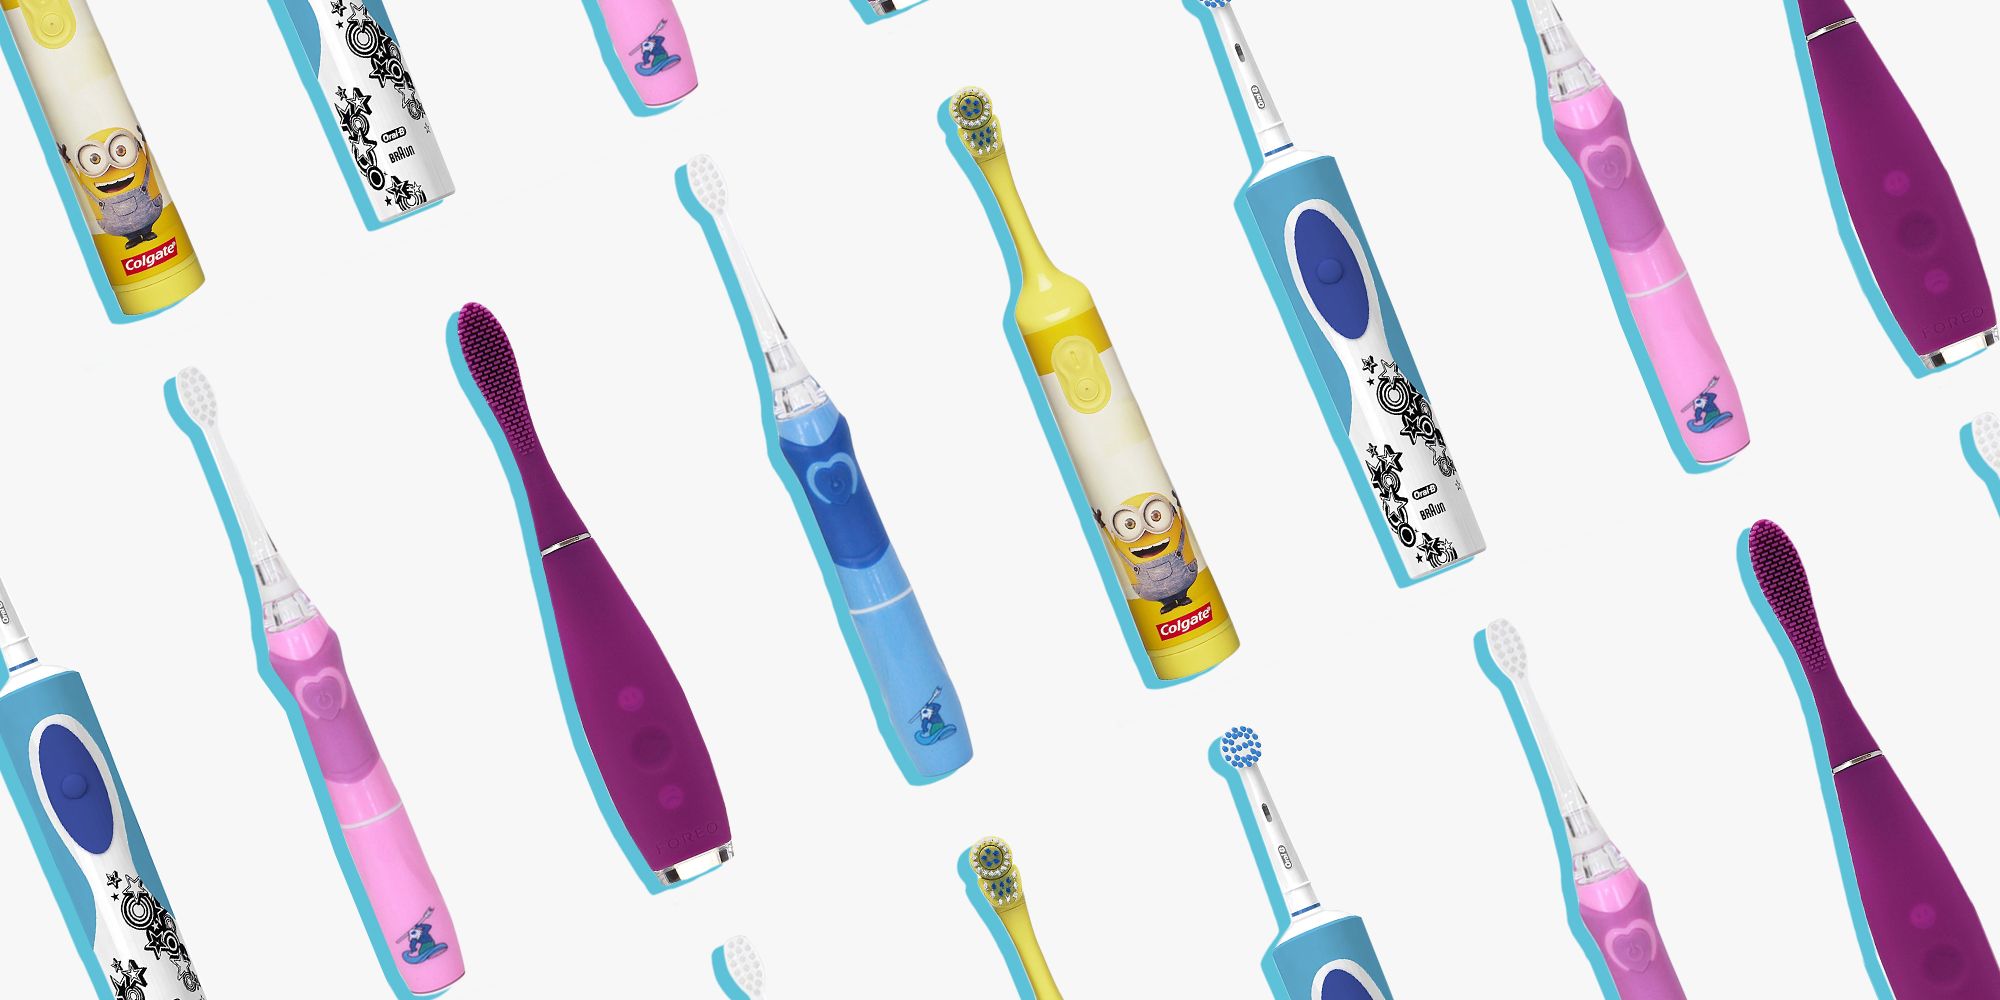 electric toothbrush childrens